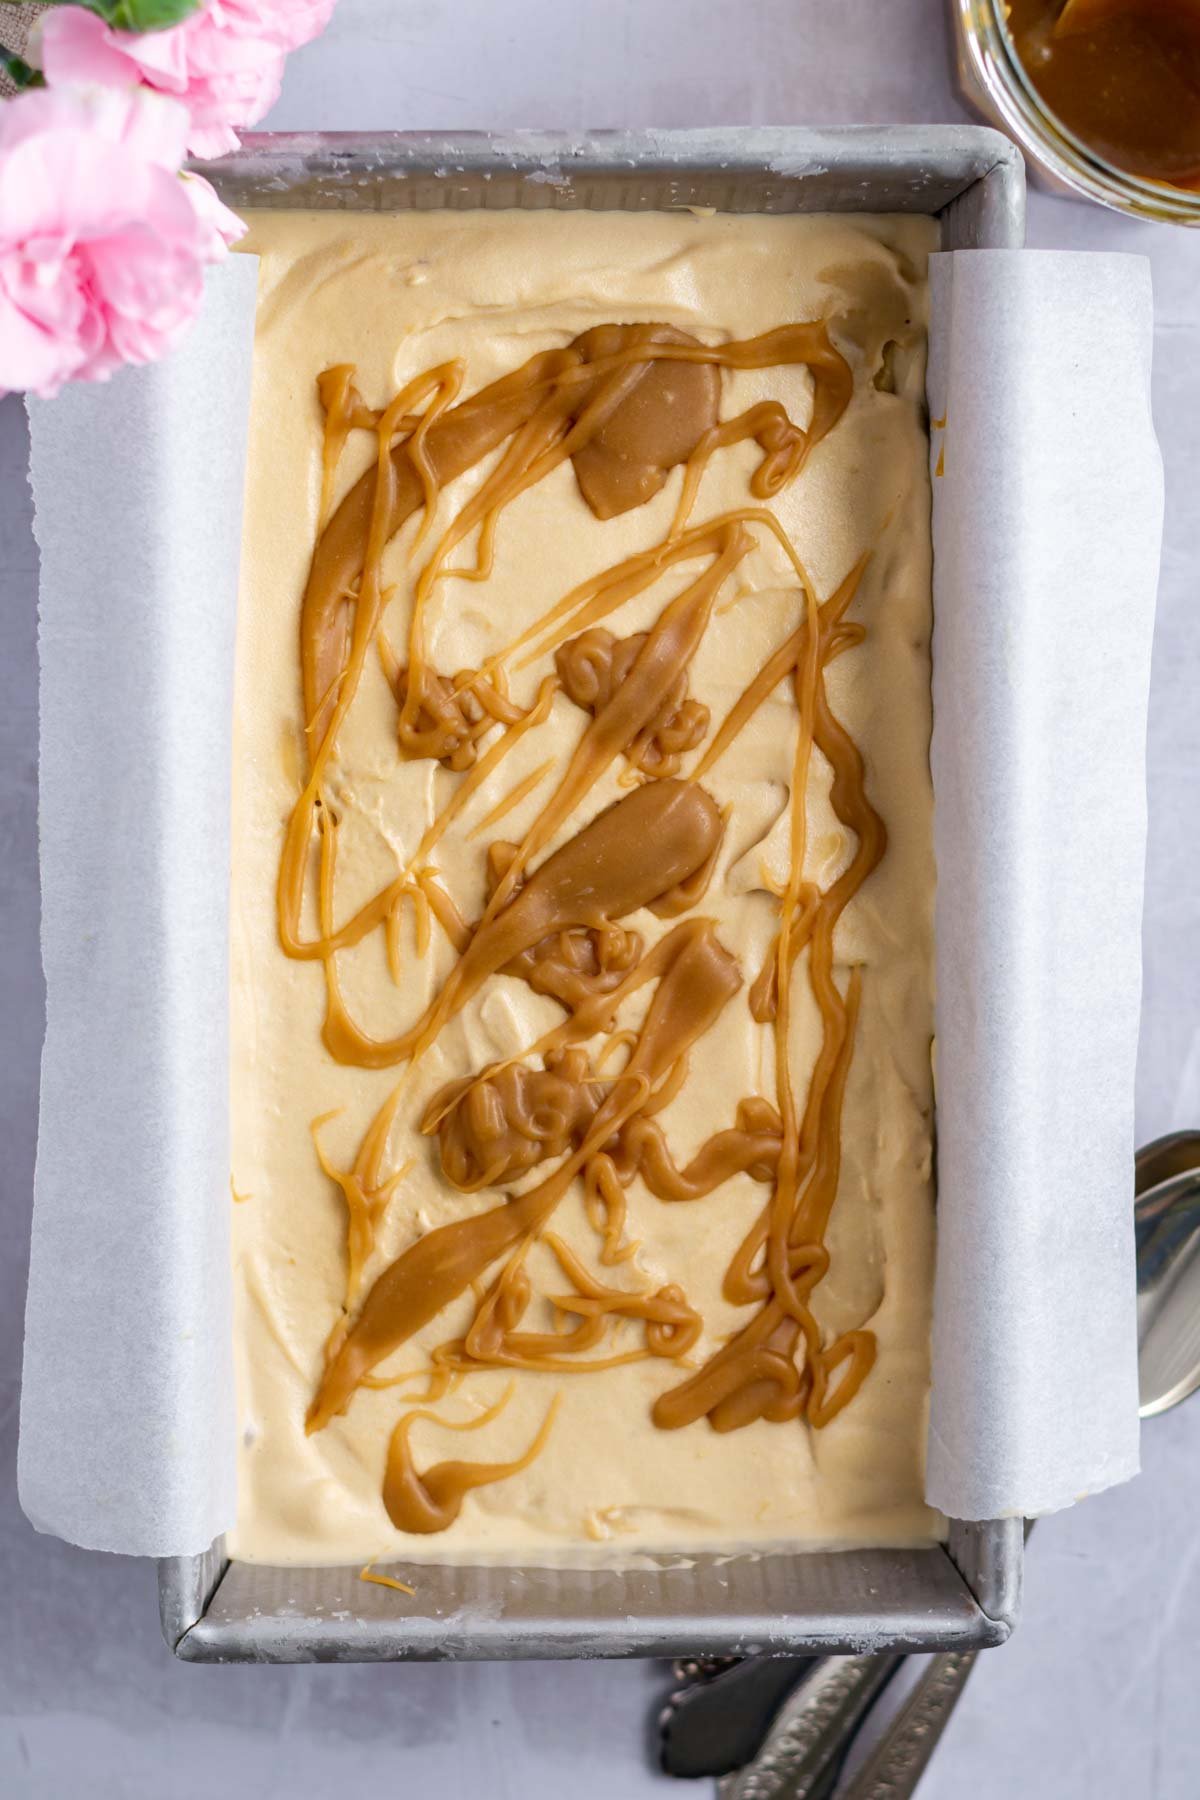 butterscotch ice cream in a loaf pan with homemade butterscotch drizzled over the top.